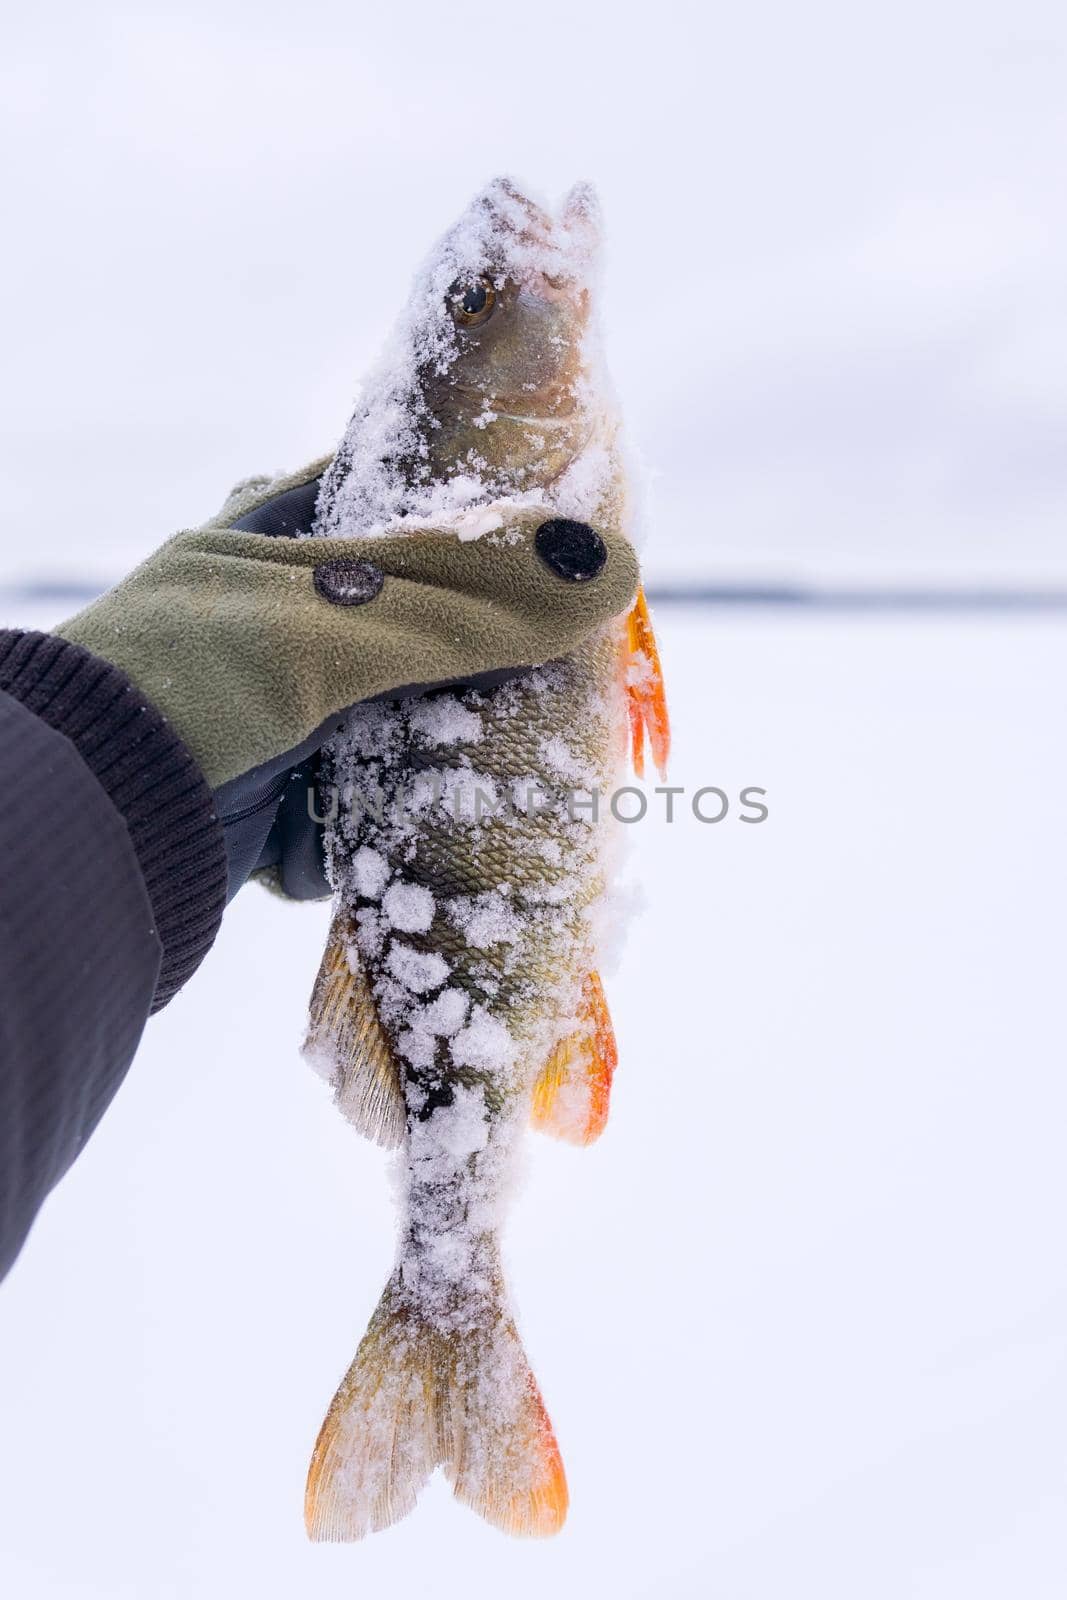 predator fish perch in the fisherman hand close up concept of fishing. selective focus